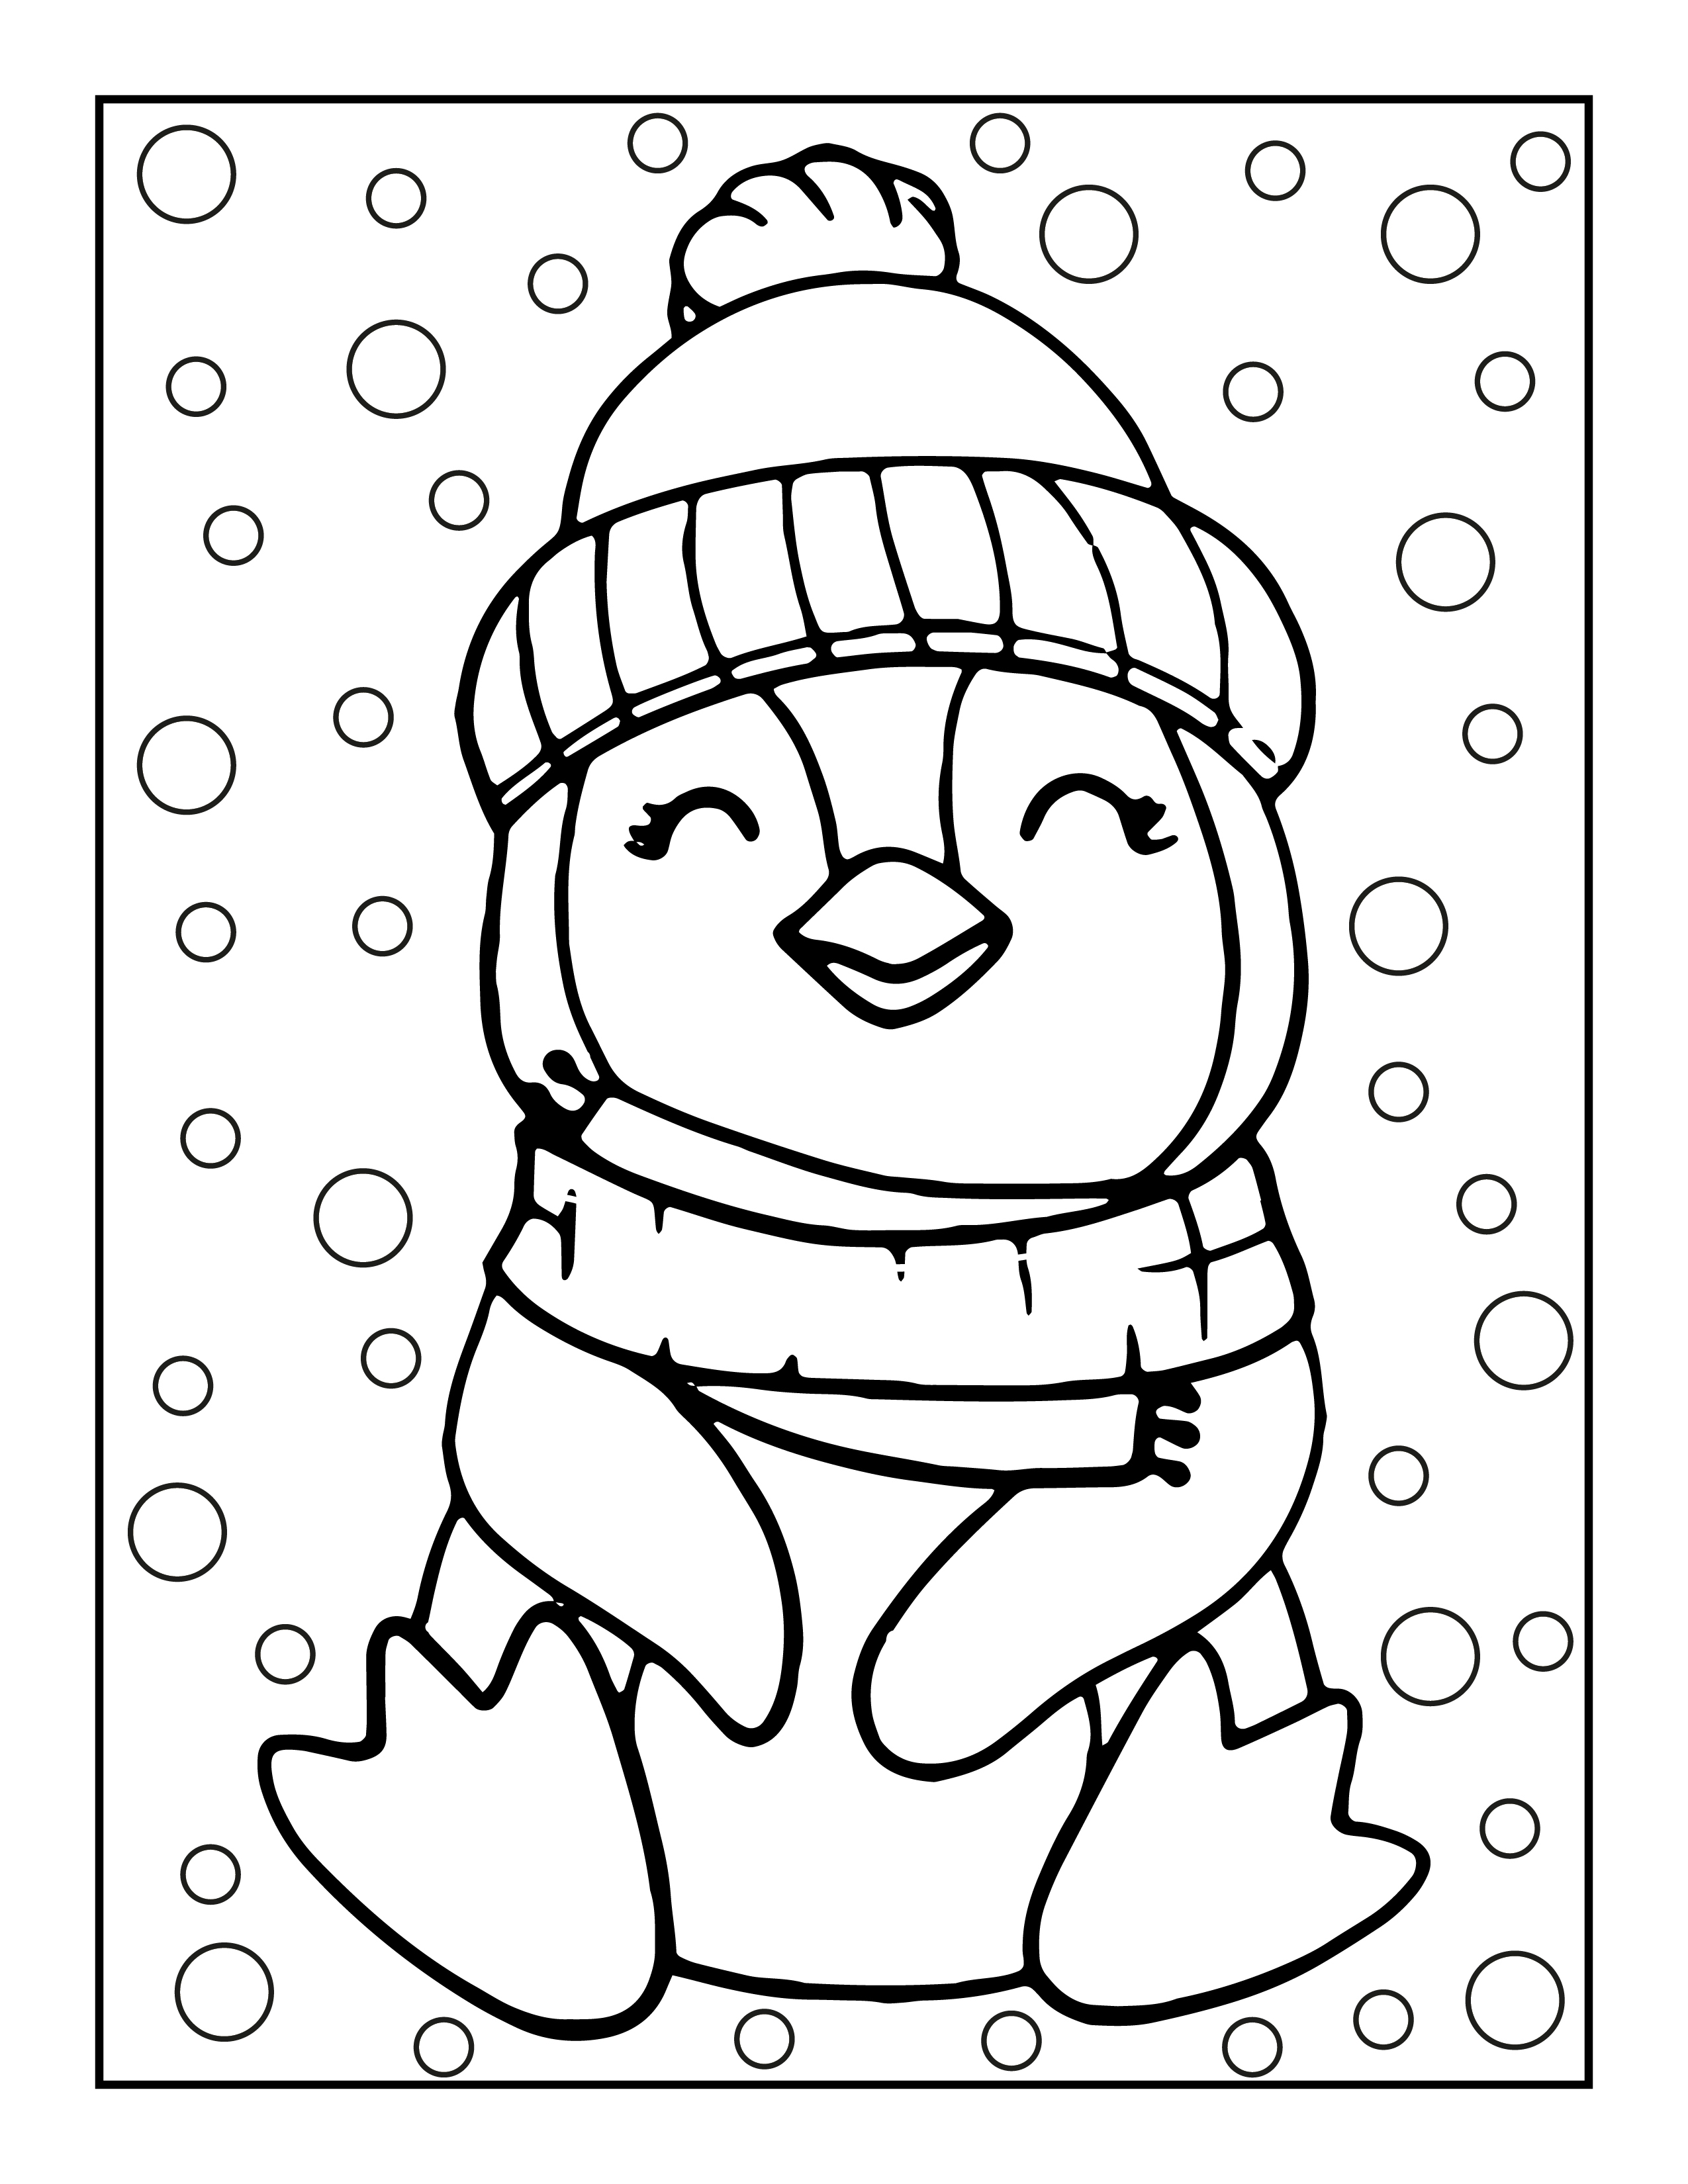 Penguin coloring pages free christmas coloring printables